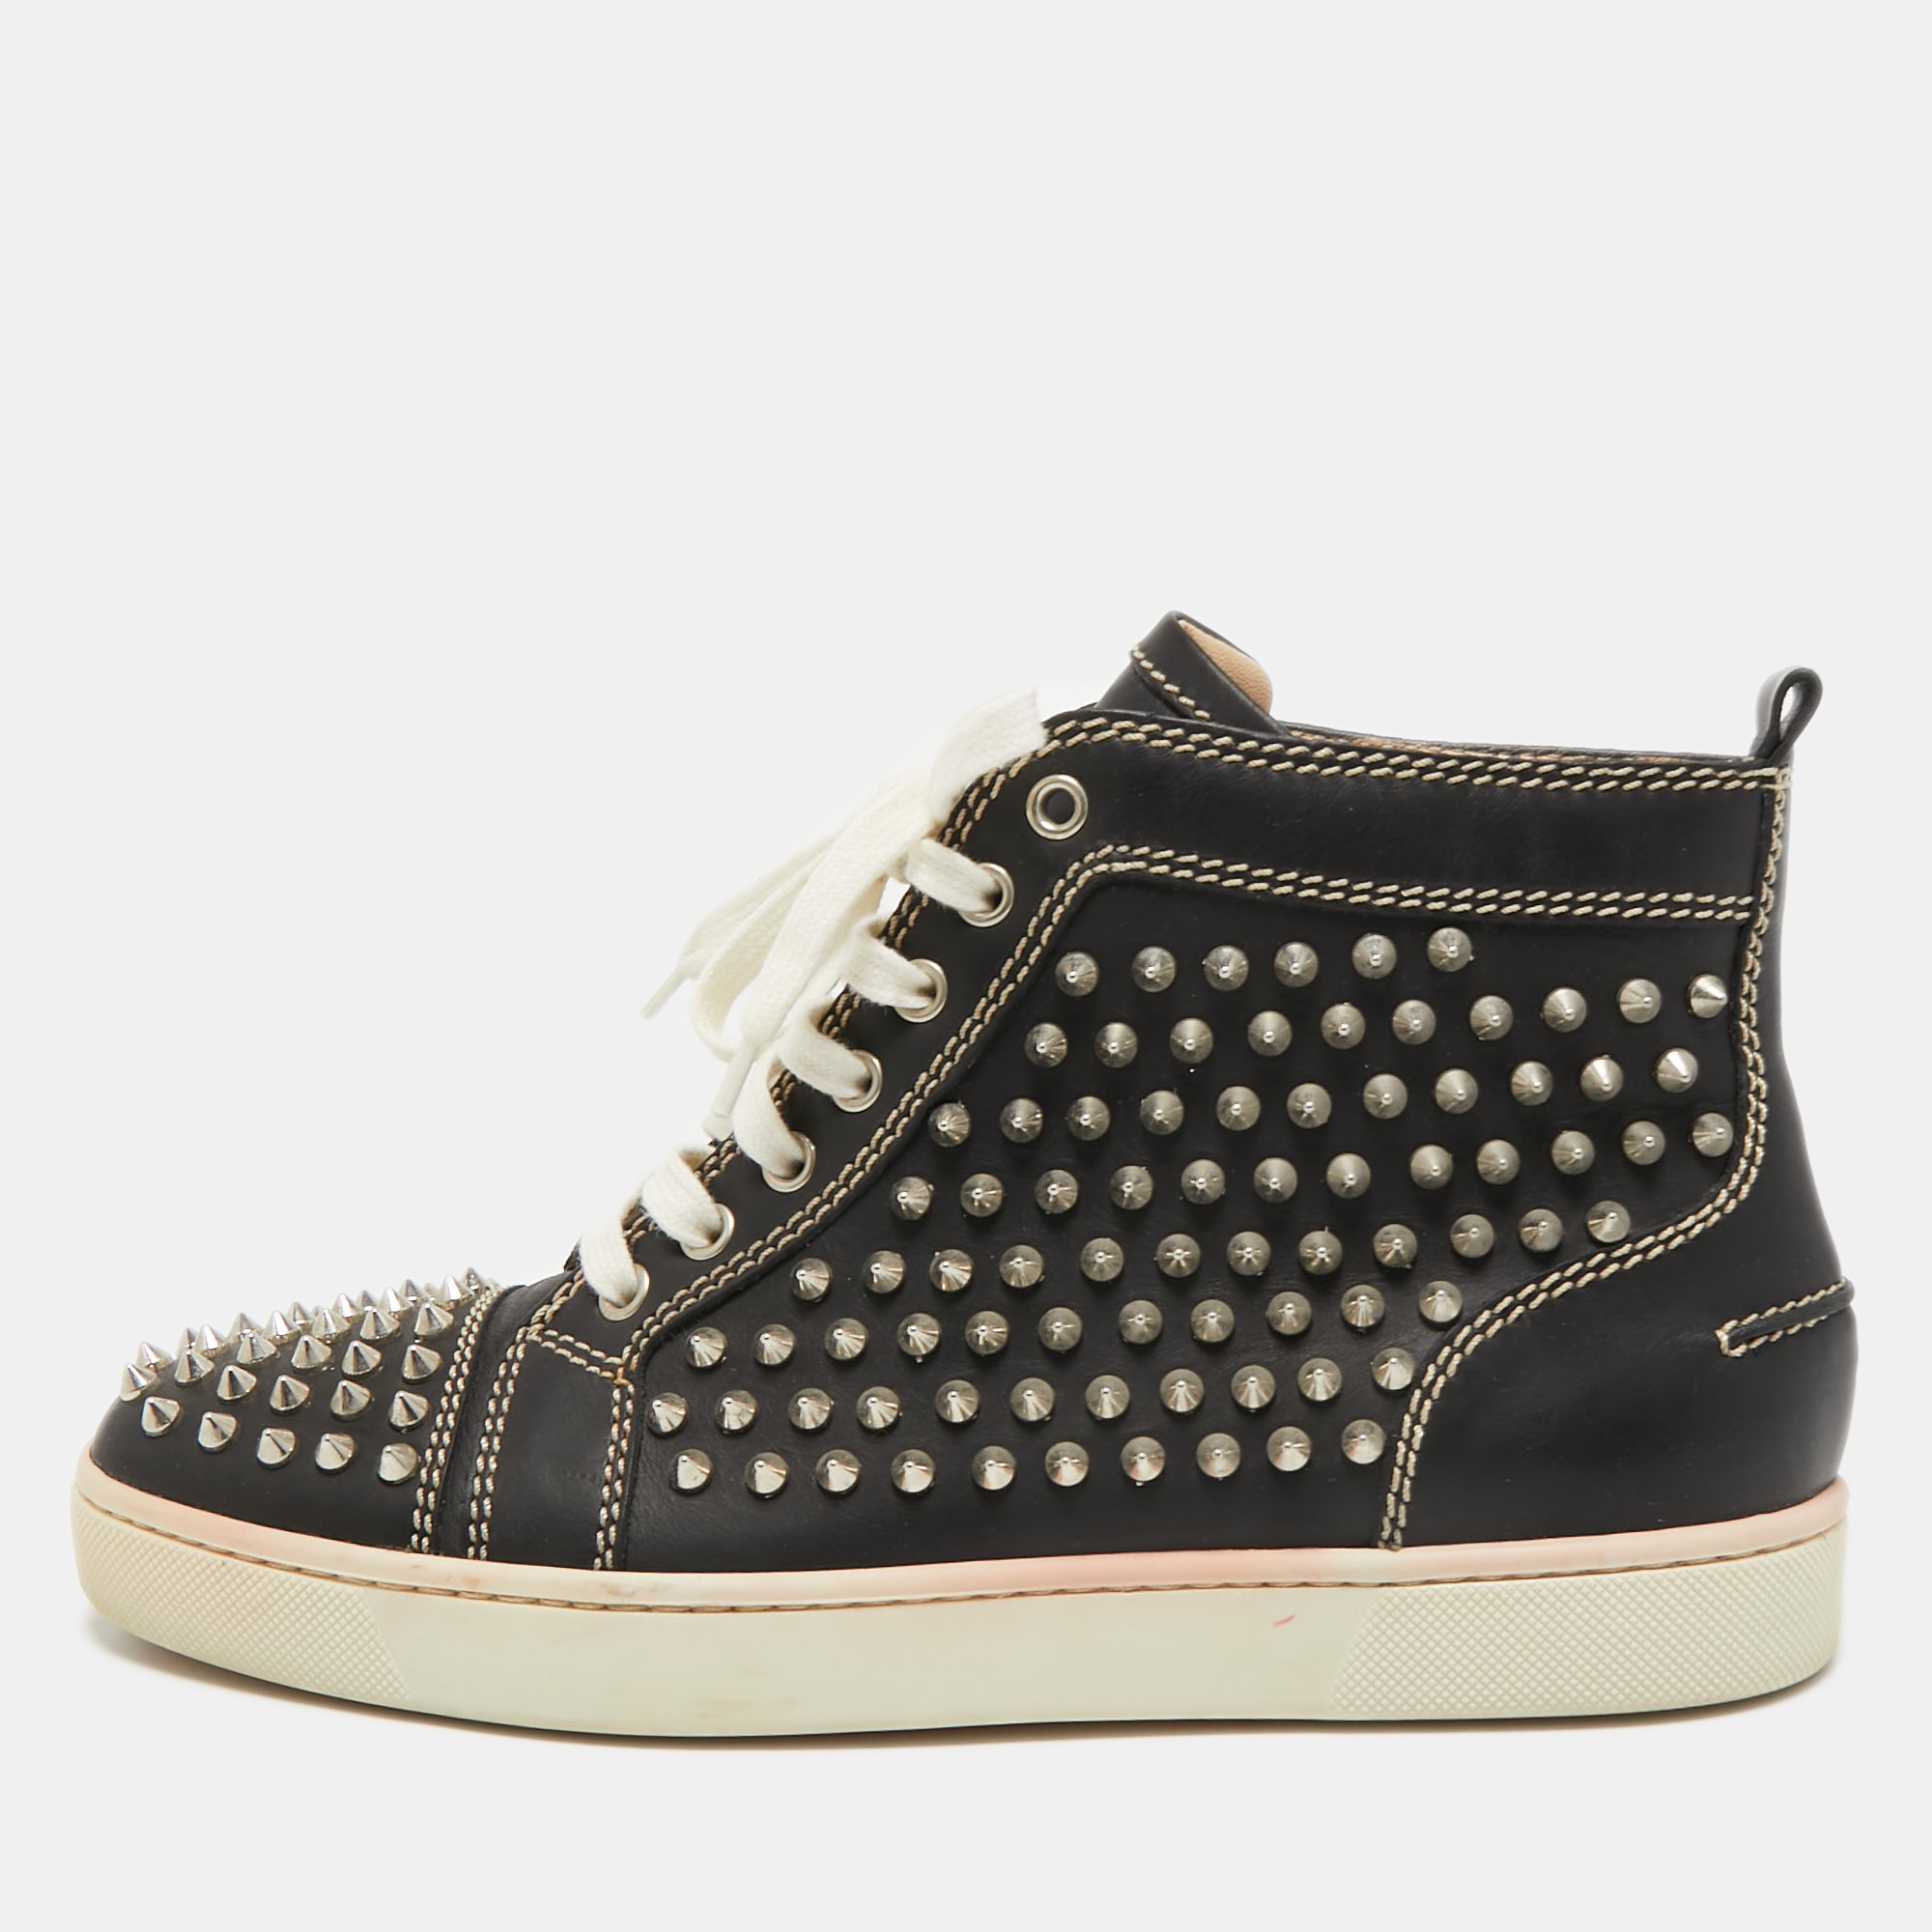 Christian Louboutin Black Leather Louis Spikes High Top Sneakers Size 40